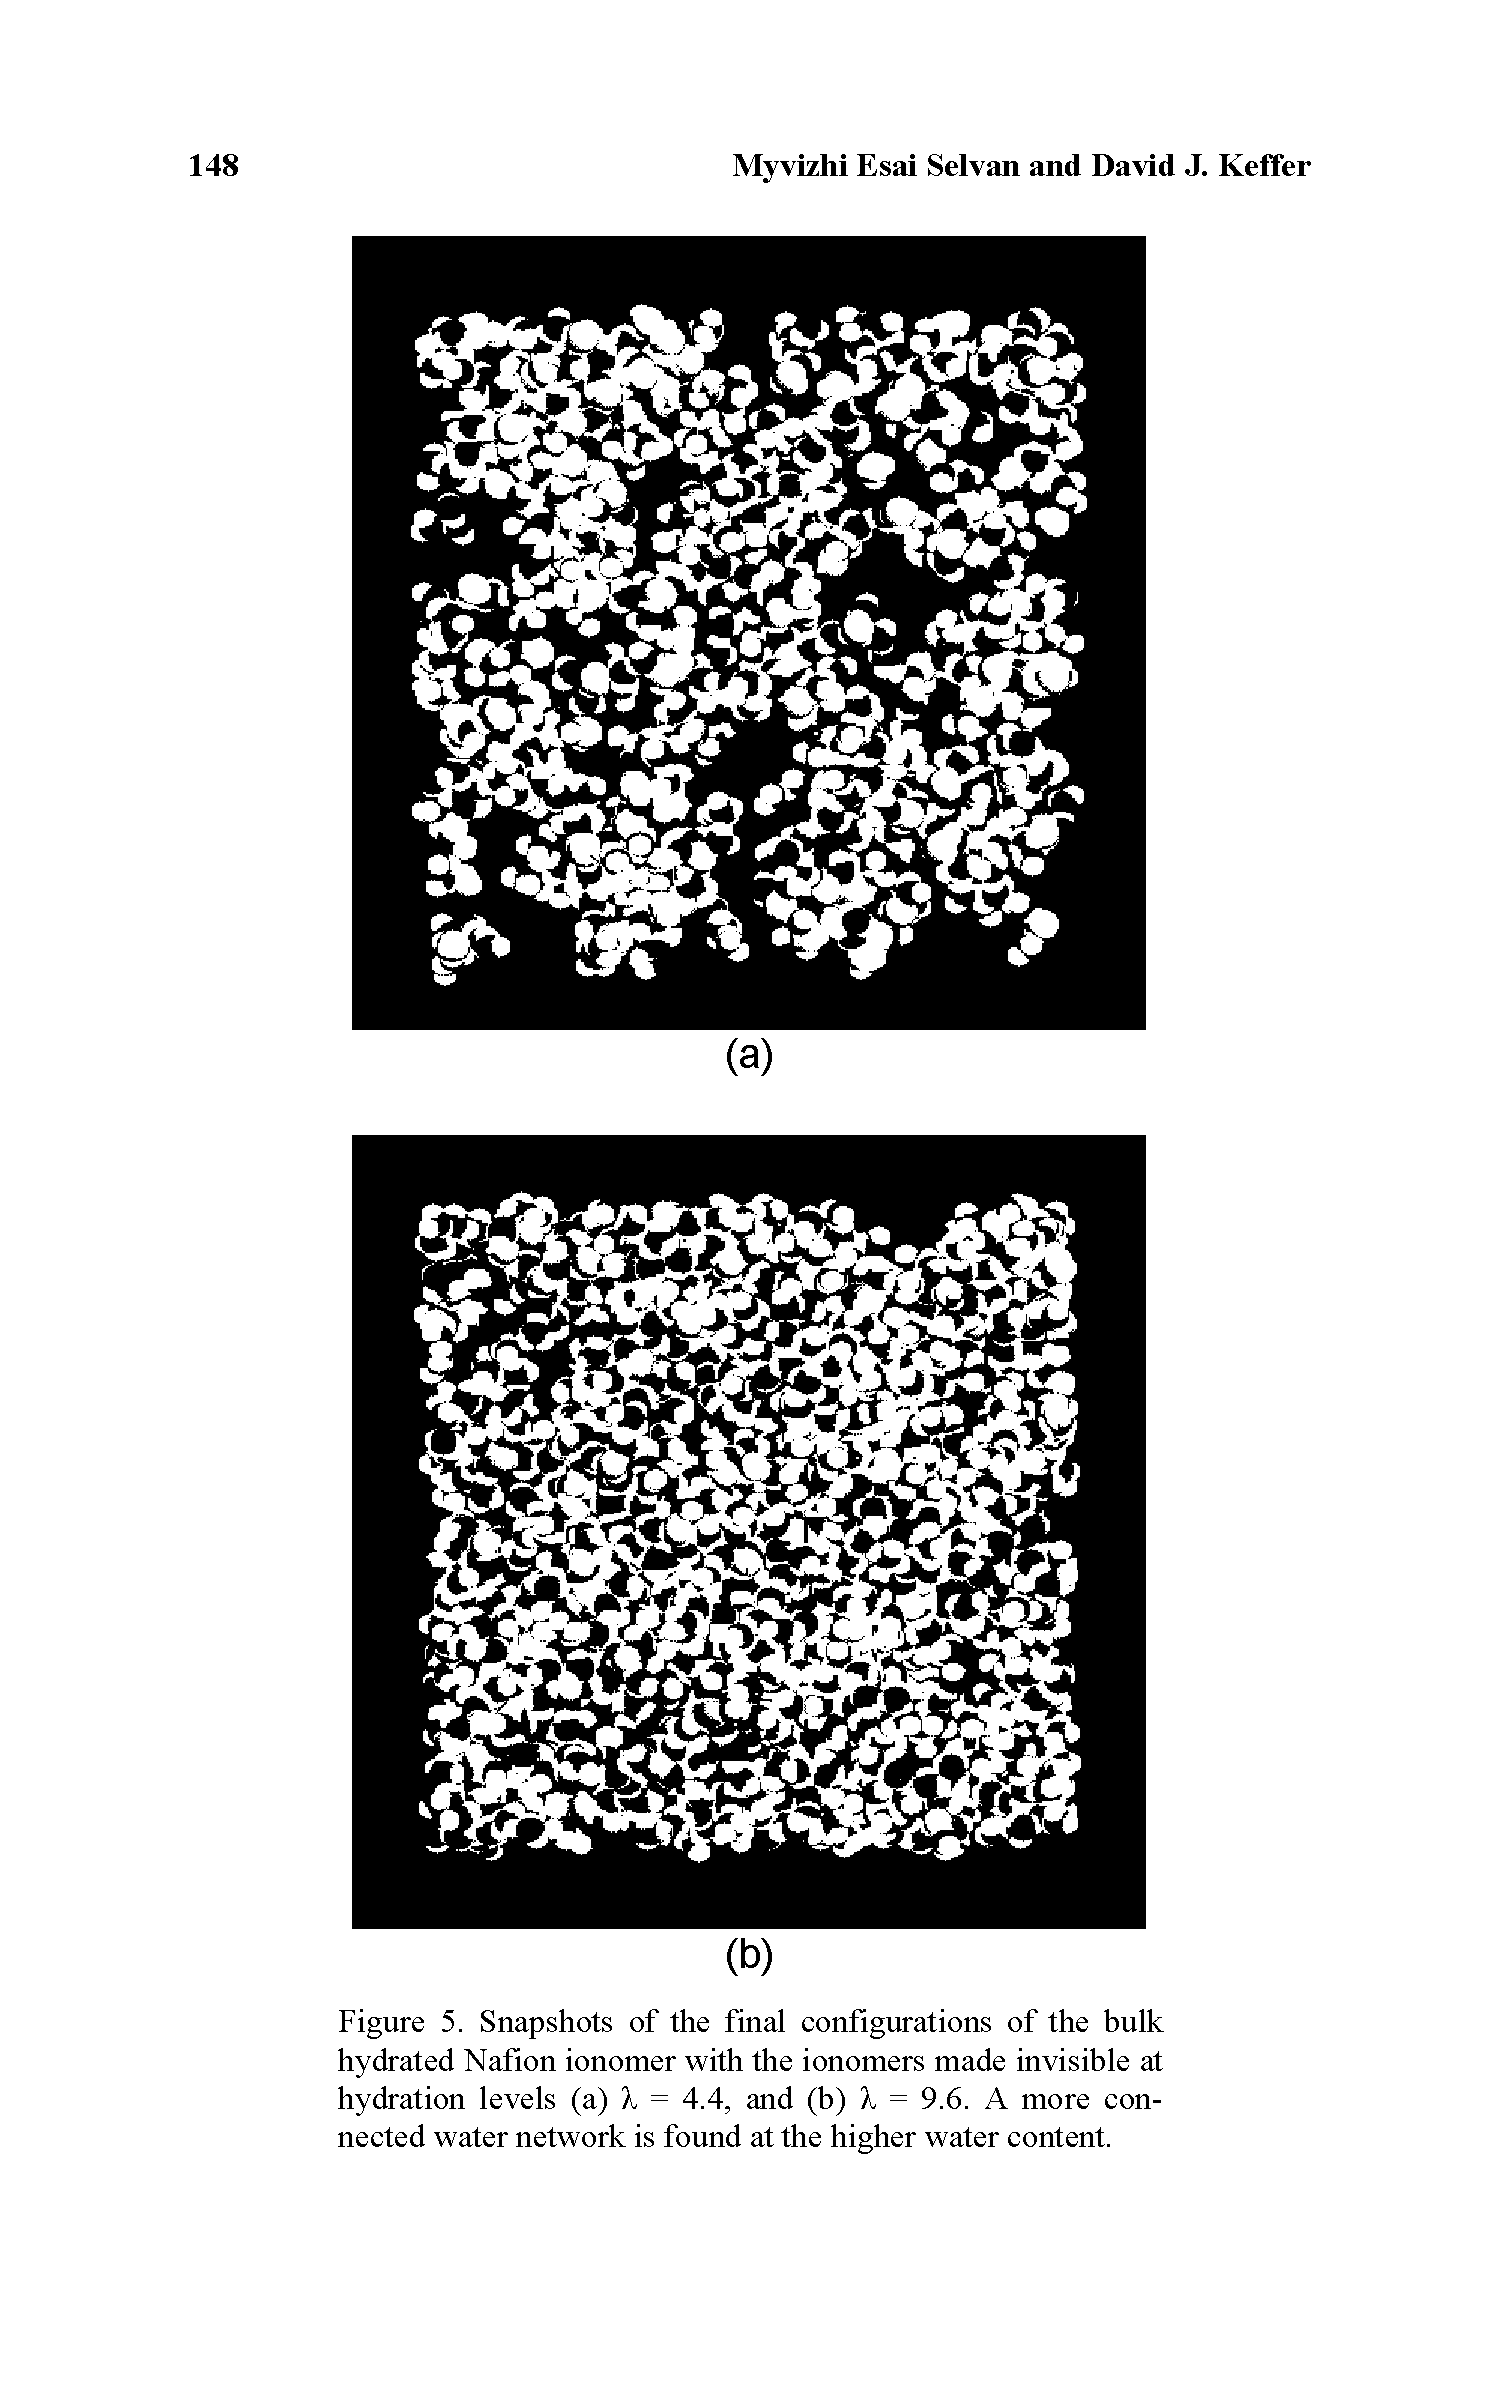 Figure 5. Snapshots of the final configurations of the bulk hydrated Nafion ionomer with the ionomers made invisible at hydration levels (a) X = 4.4, and (b) X = 9.6. A more connected water network is found at the higher water content.